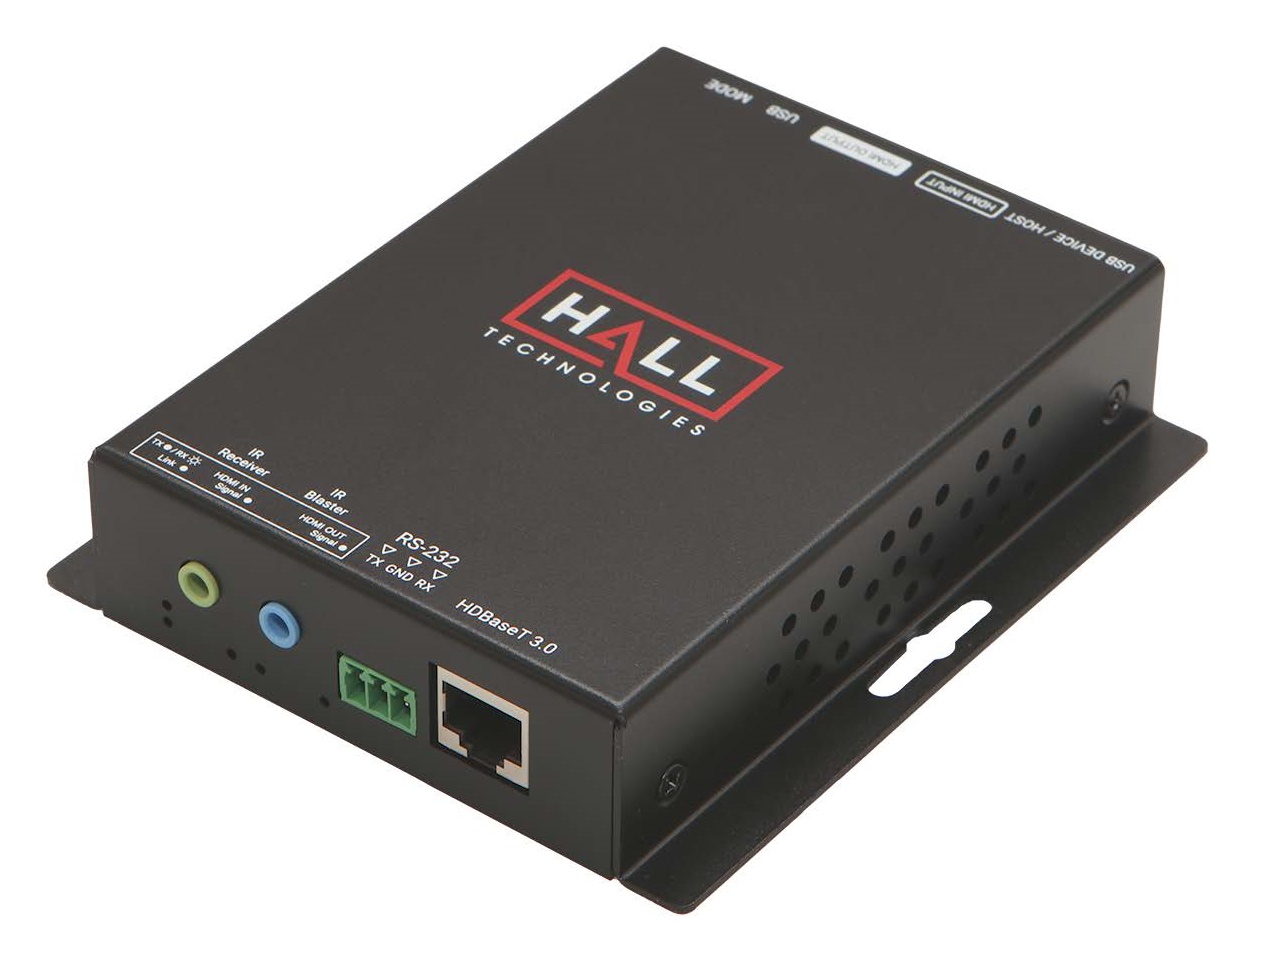 EX-HDBT3-RX100 HDMI2.0 HDBaseT Extender (Receiver) with Bi-Directional IR/USB 2.0/RS-232/PoE by Hall Technologies